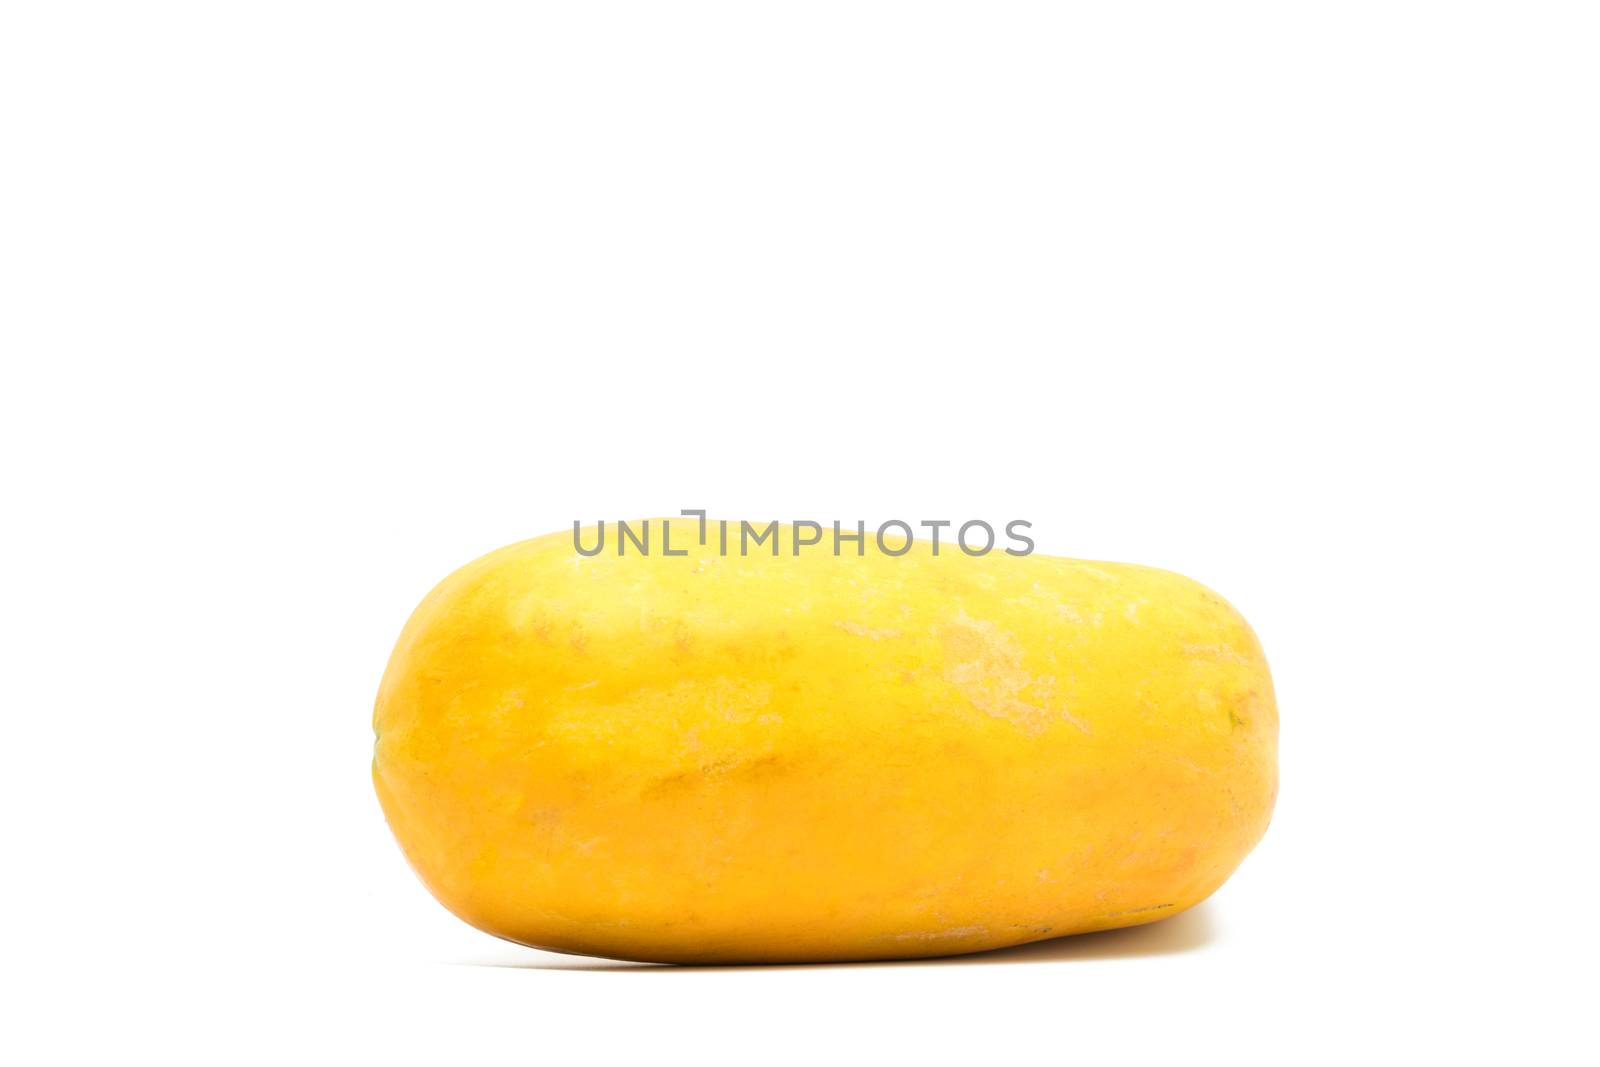 Ripe papaya fruit isolated on white background with copy space. Natural source of vitamin C, folate and minerals. Healthy food for pregnant and breast feeding woman. Tropical fruits.